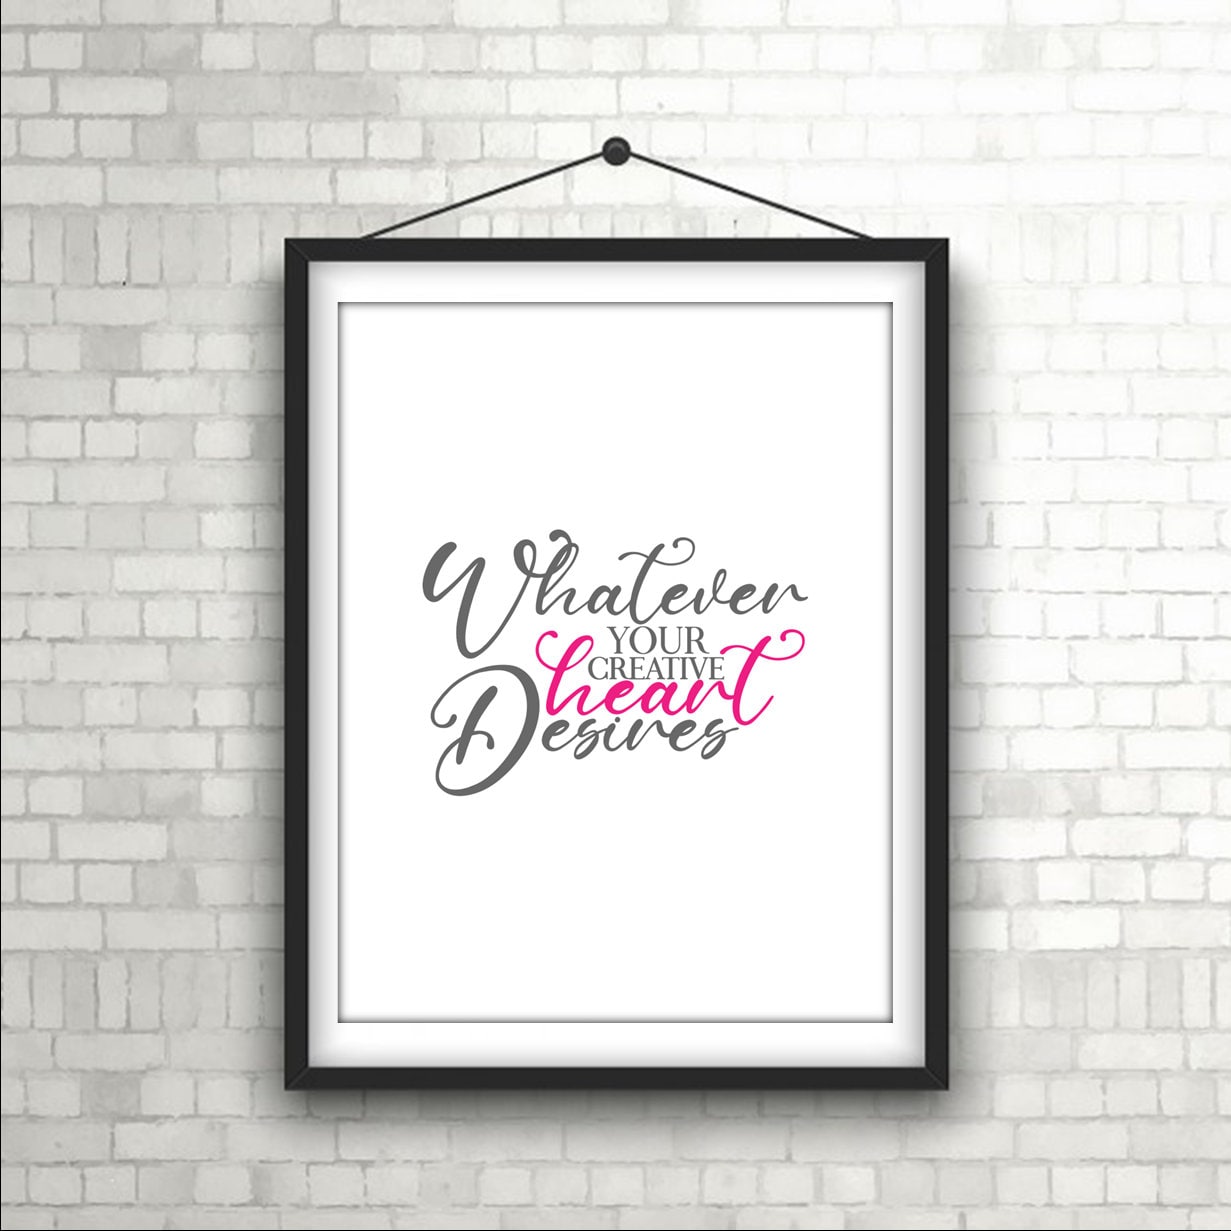 Whatever Your Creative Heart Desires" Empowering Wall Art Print